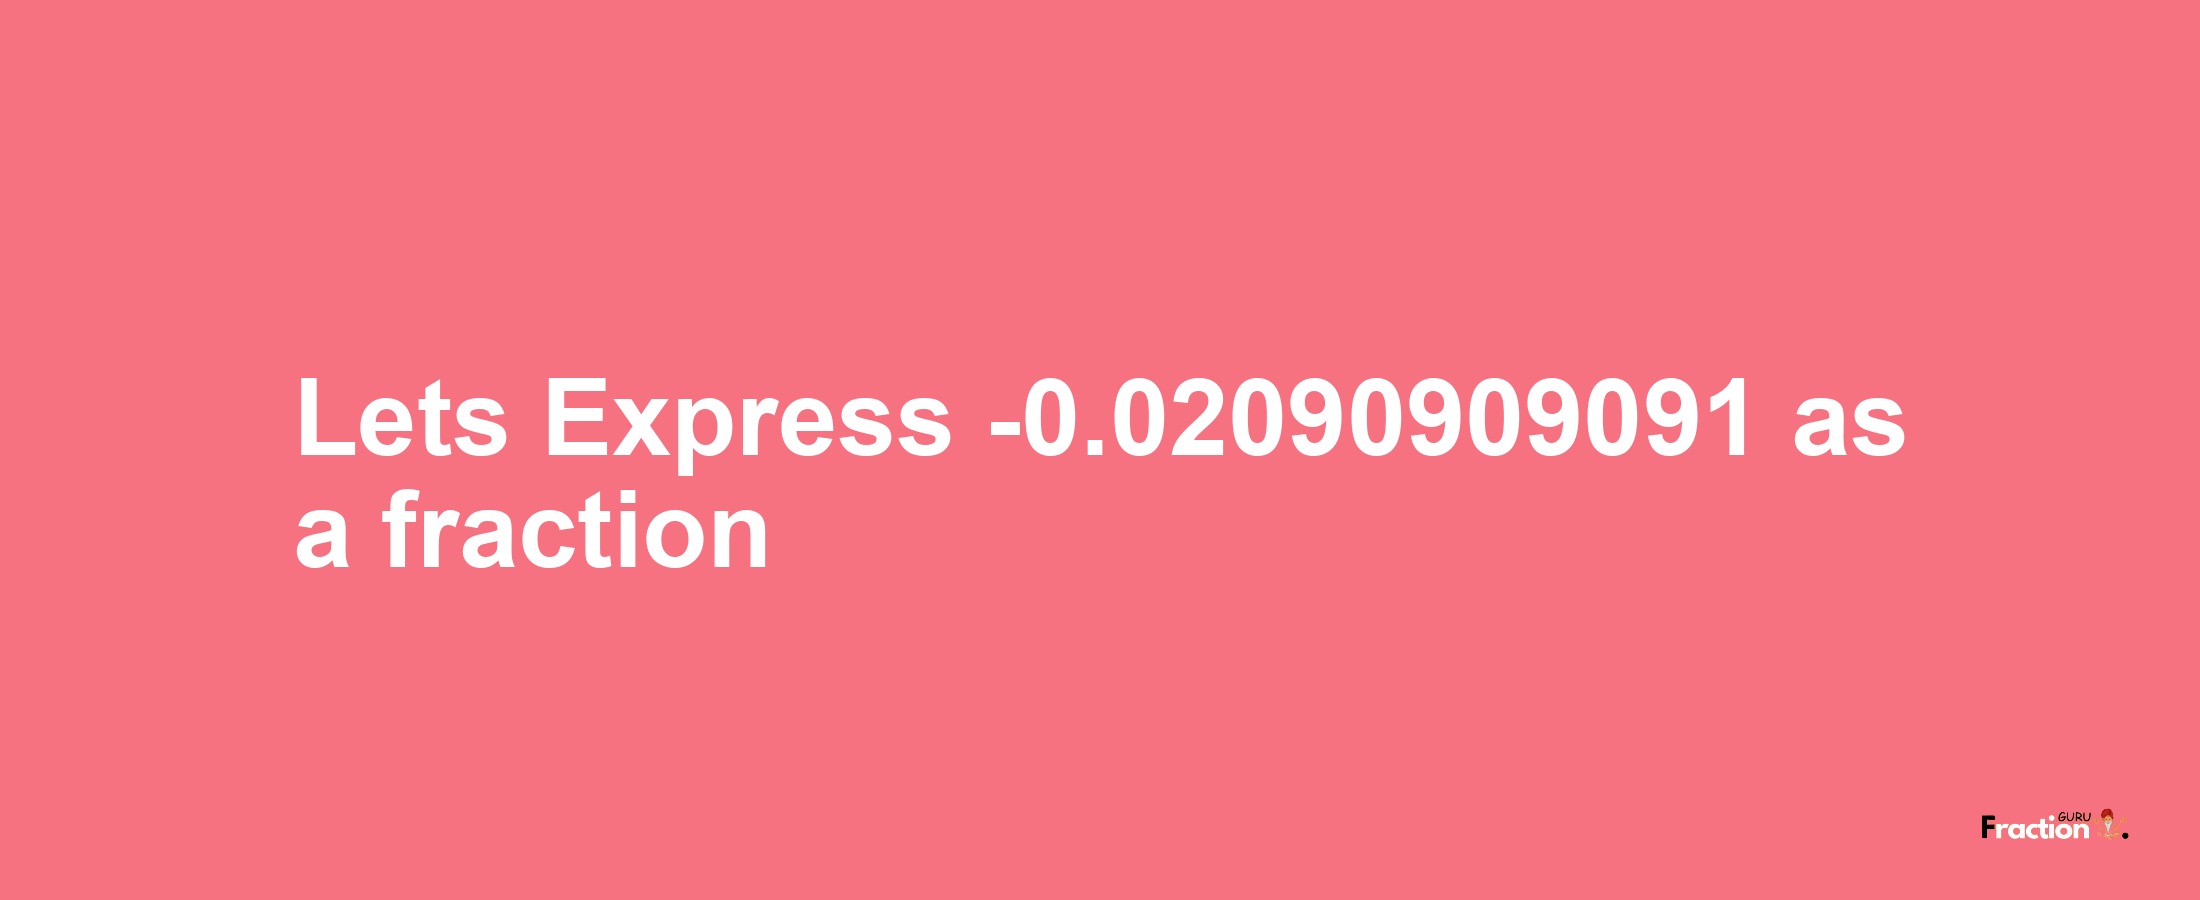 Lets Express -0.02090909091 as afraction